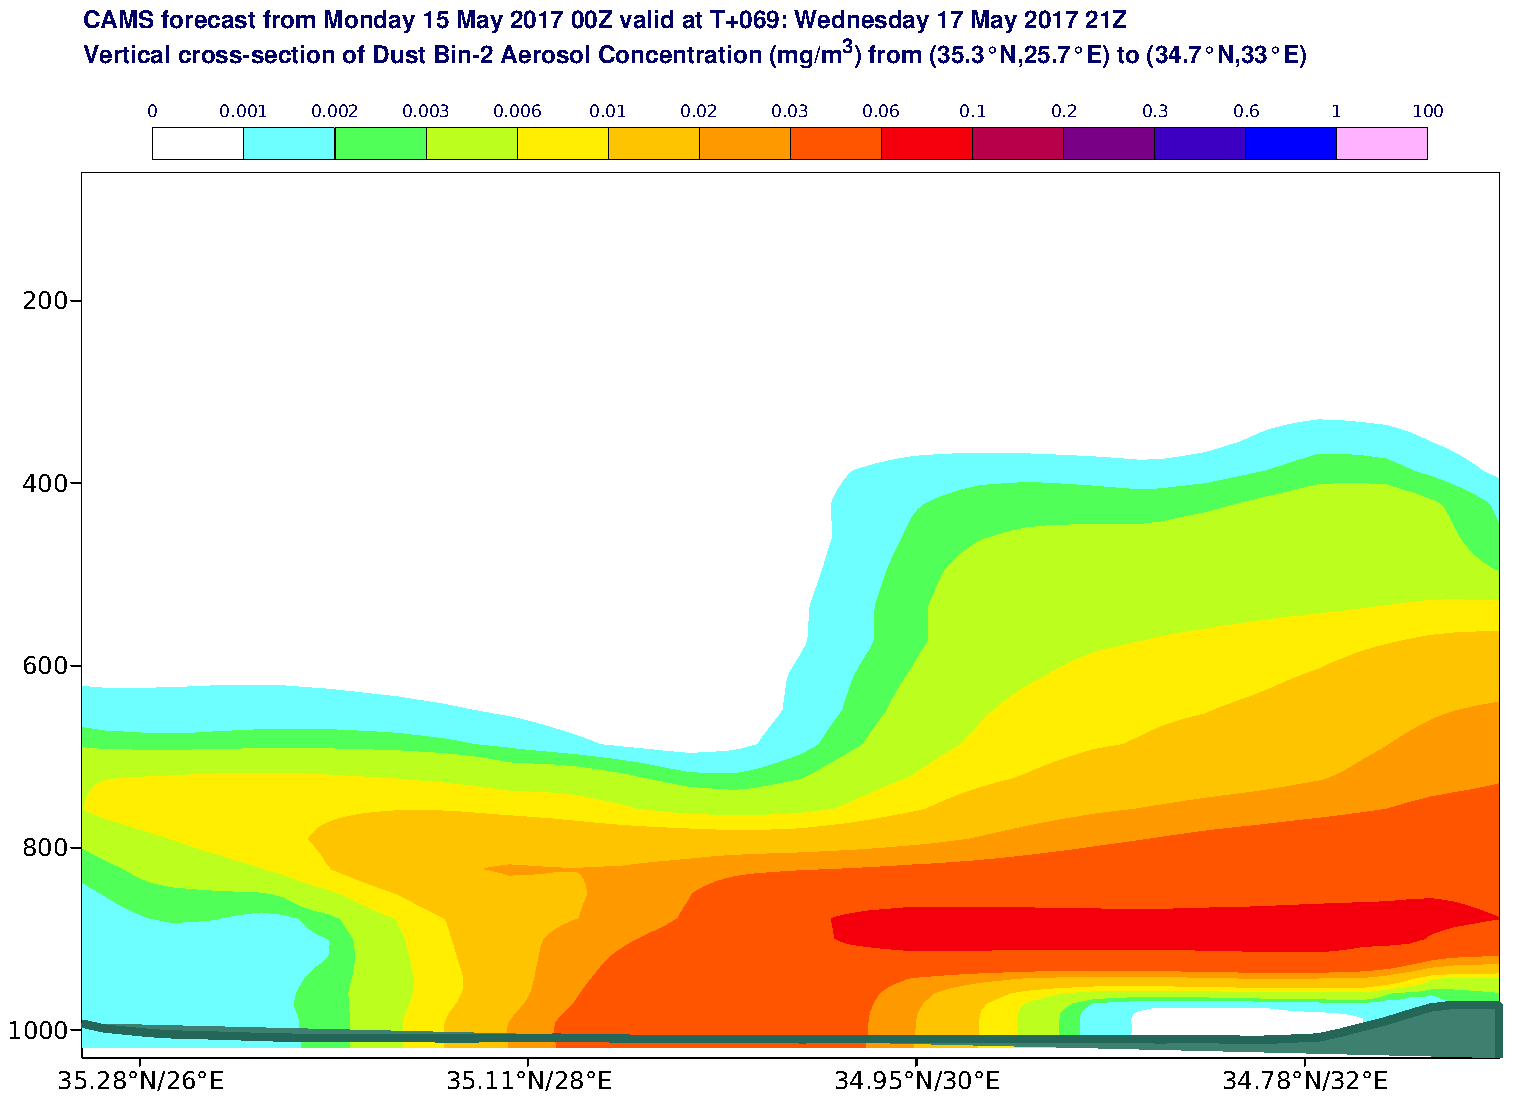 Vertical cross-section of Dust Bin-2 Aerosol Concentration (mg/m3) valid at T69 - 2017-05-17 21:00